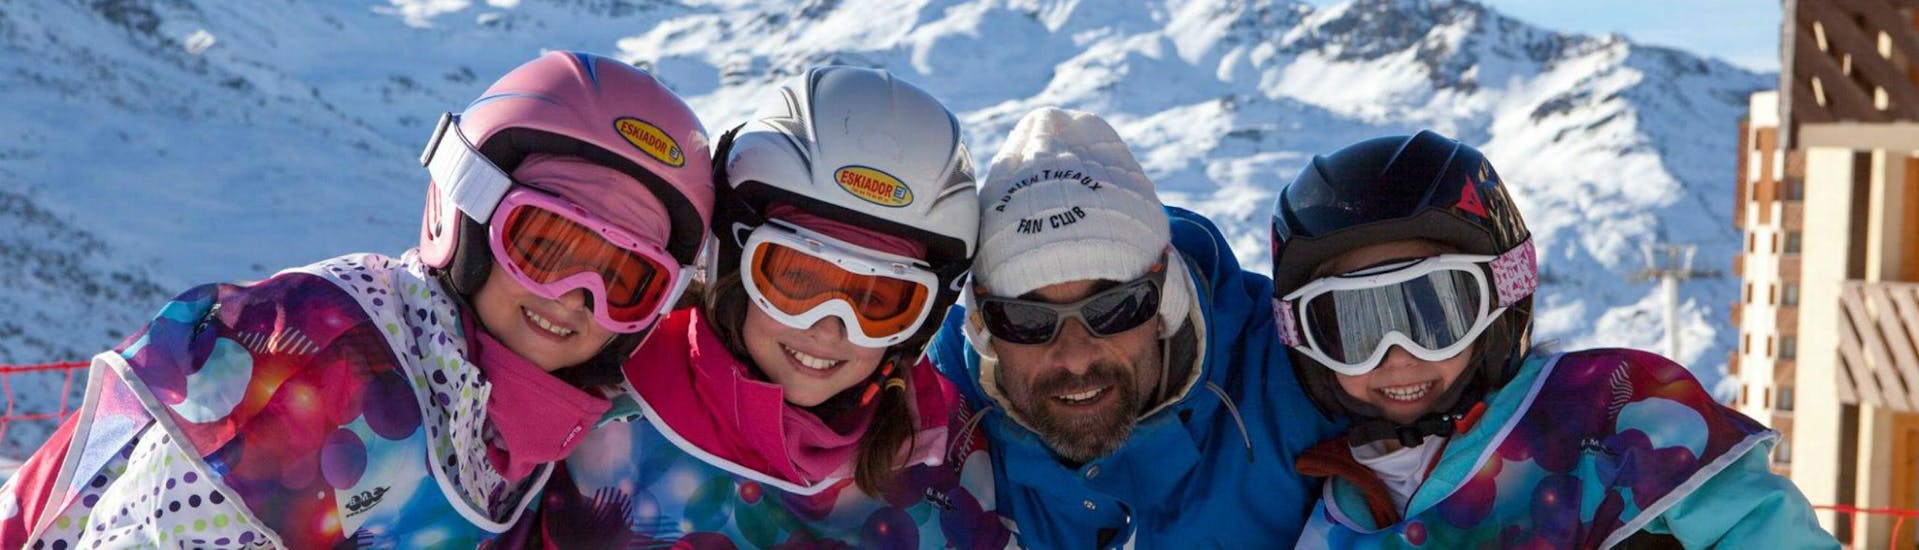 A group of children in full skiing gear are smiling at the camera together with their ski instructor from the ski school Prosneige Val Thorens & Les Menuires while preparing for their Private Ski Lessons for Kids - All Ages - High Season.